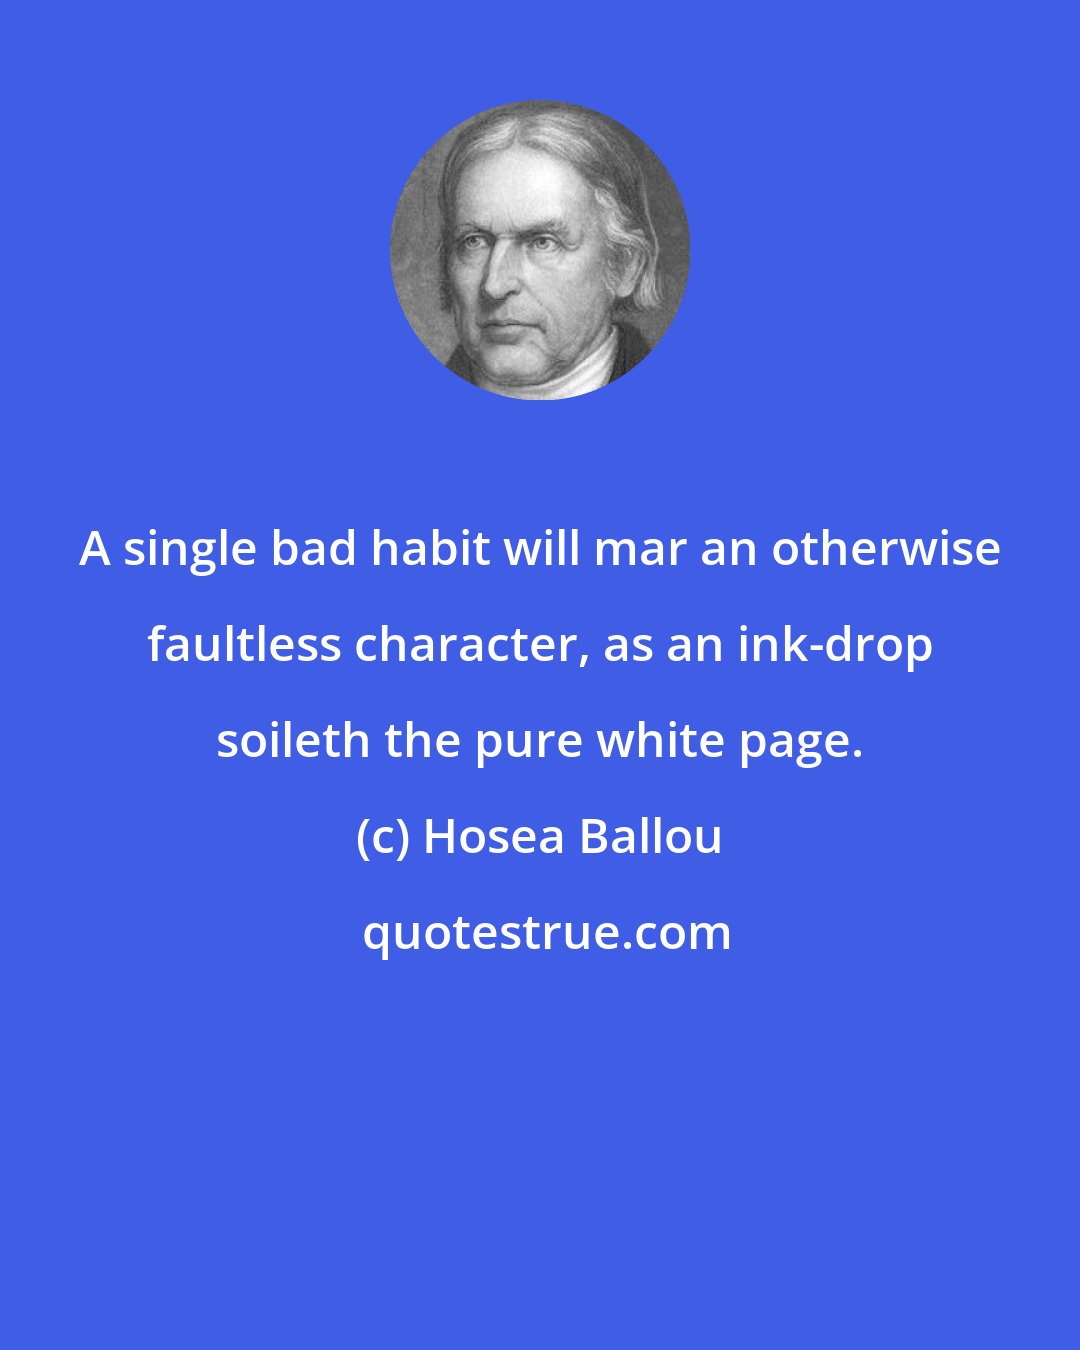 Hosea Ballou: A single bad habit will mar an otherwise faultless character, as an ink-drop soileth the pure white page.